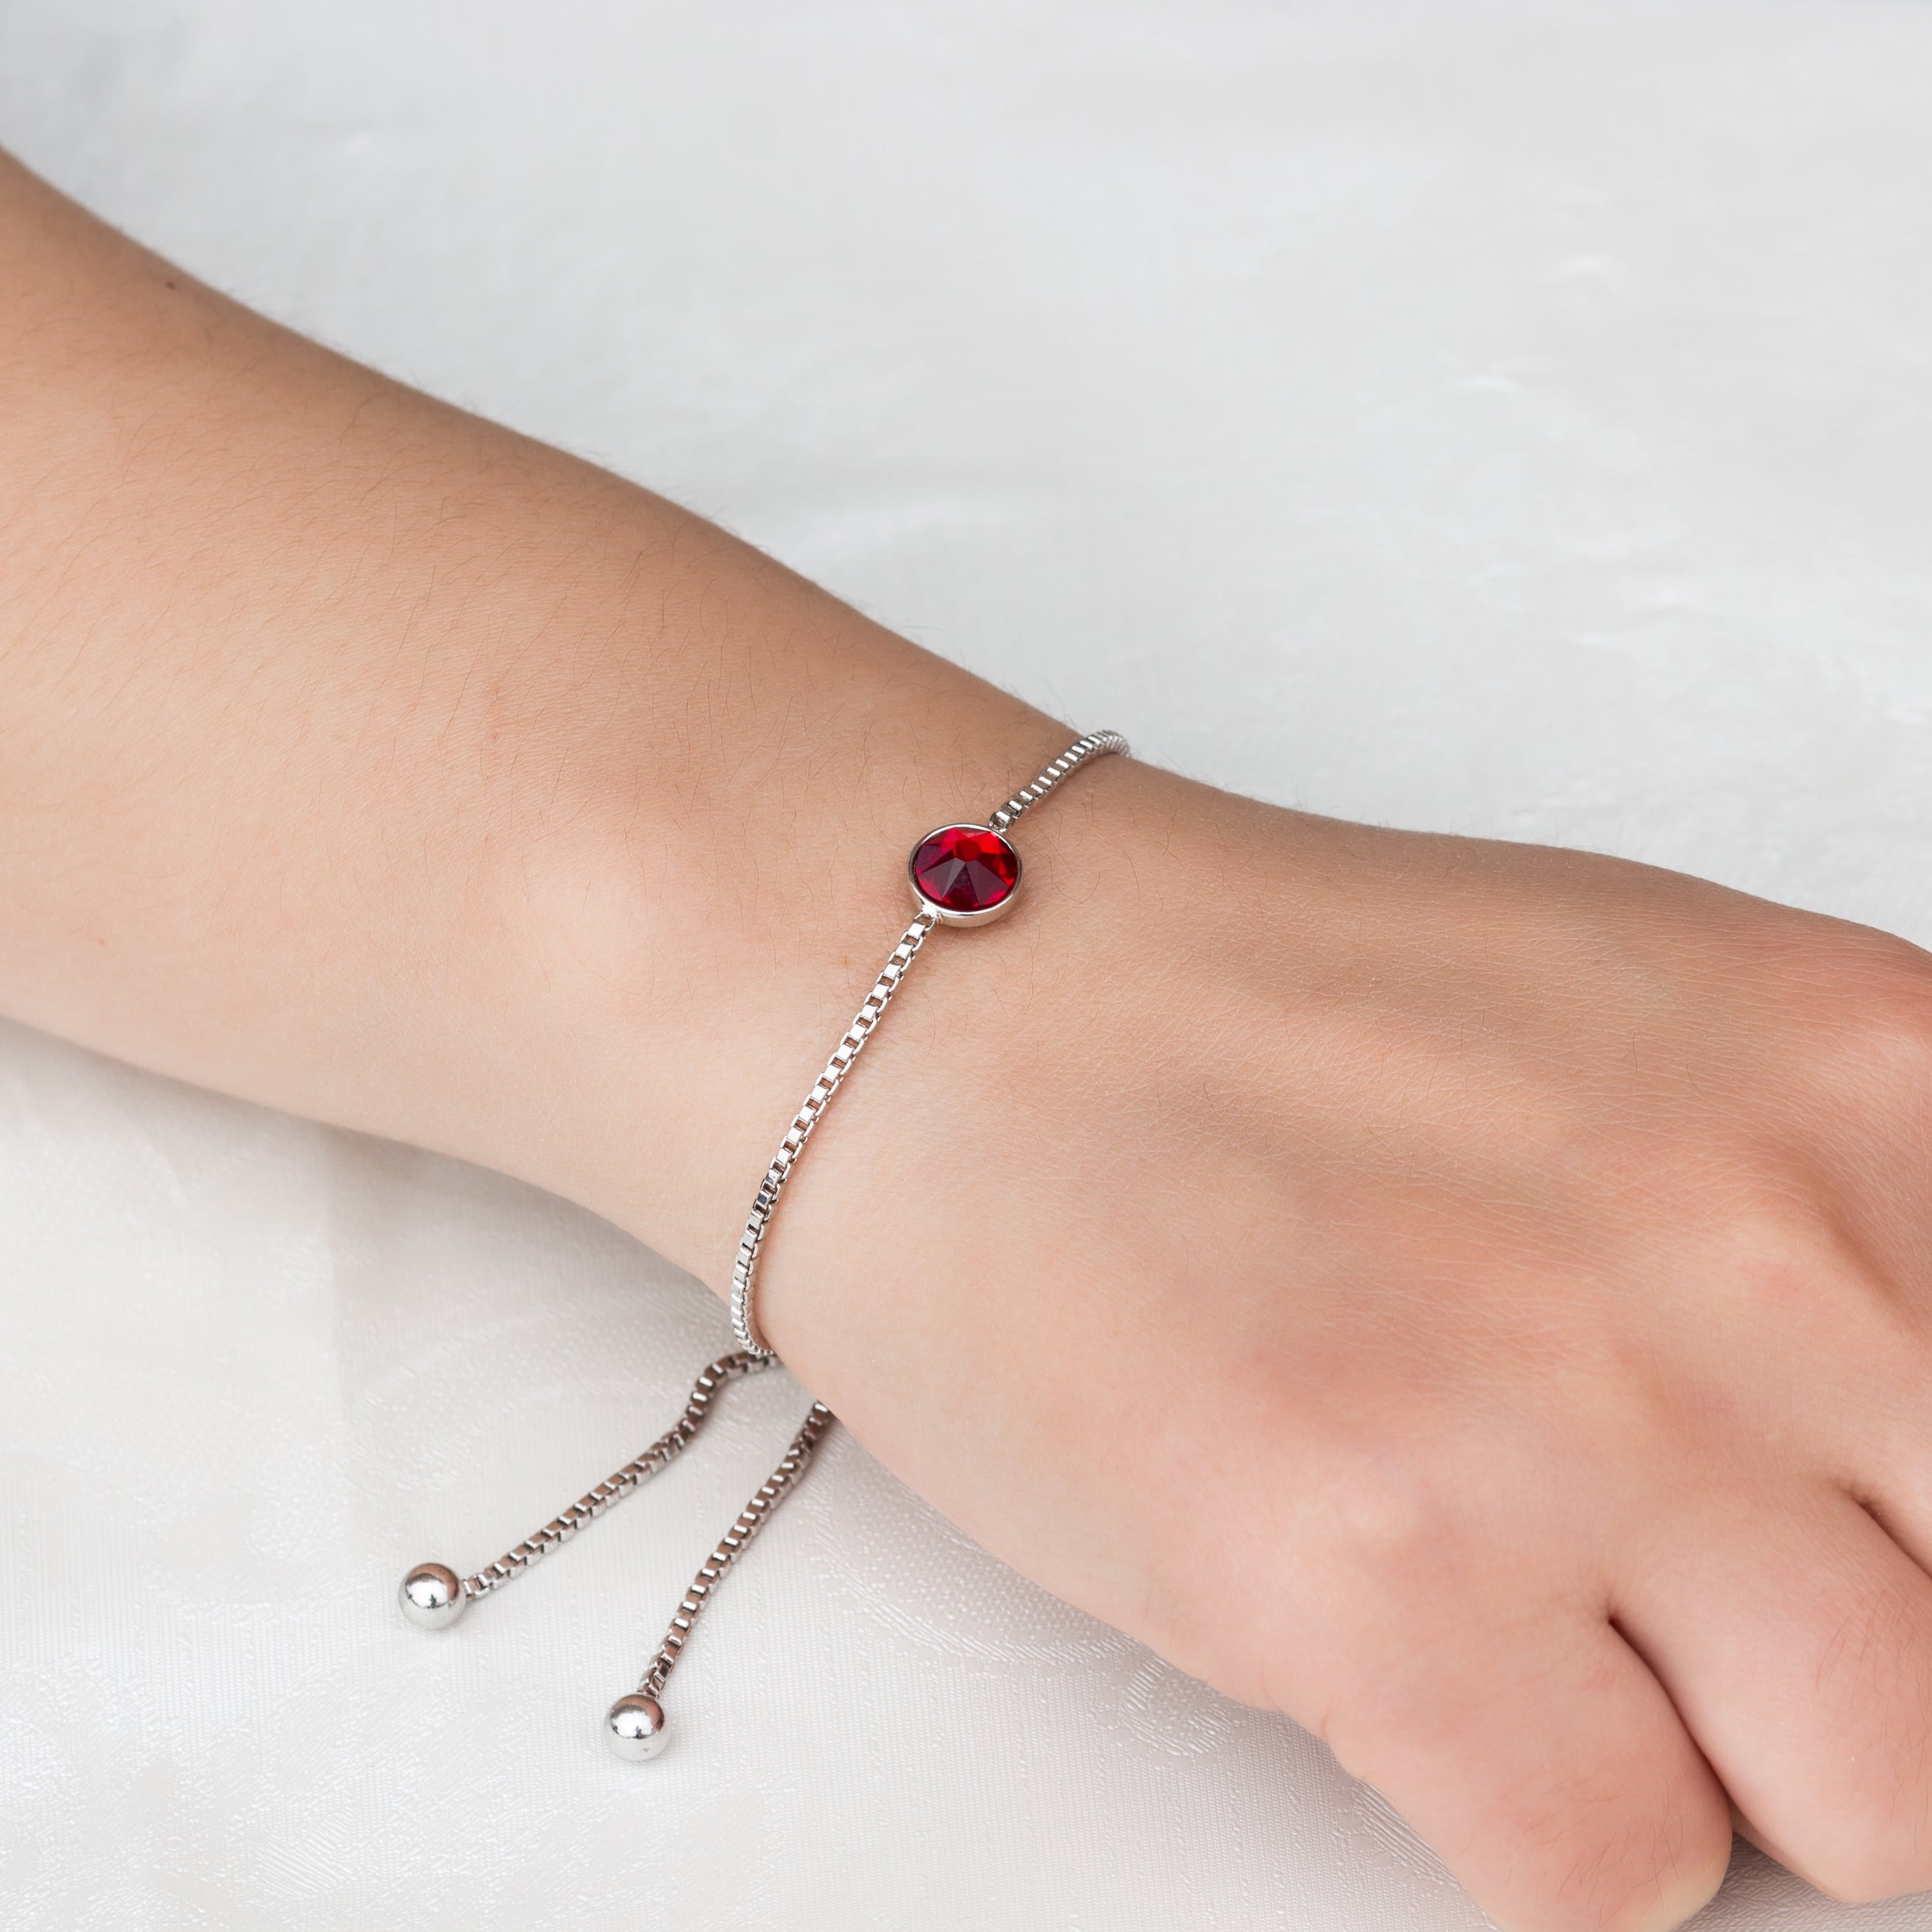 July (Ruby) Birthstone Bracelet Created with Zircondia® Crystals